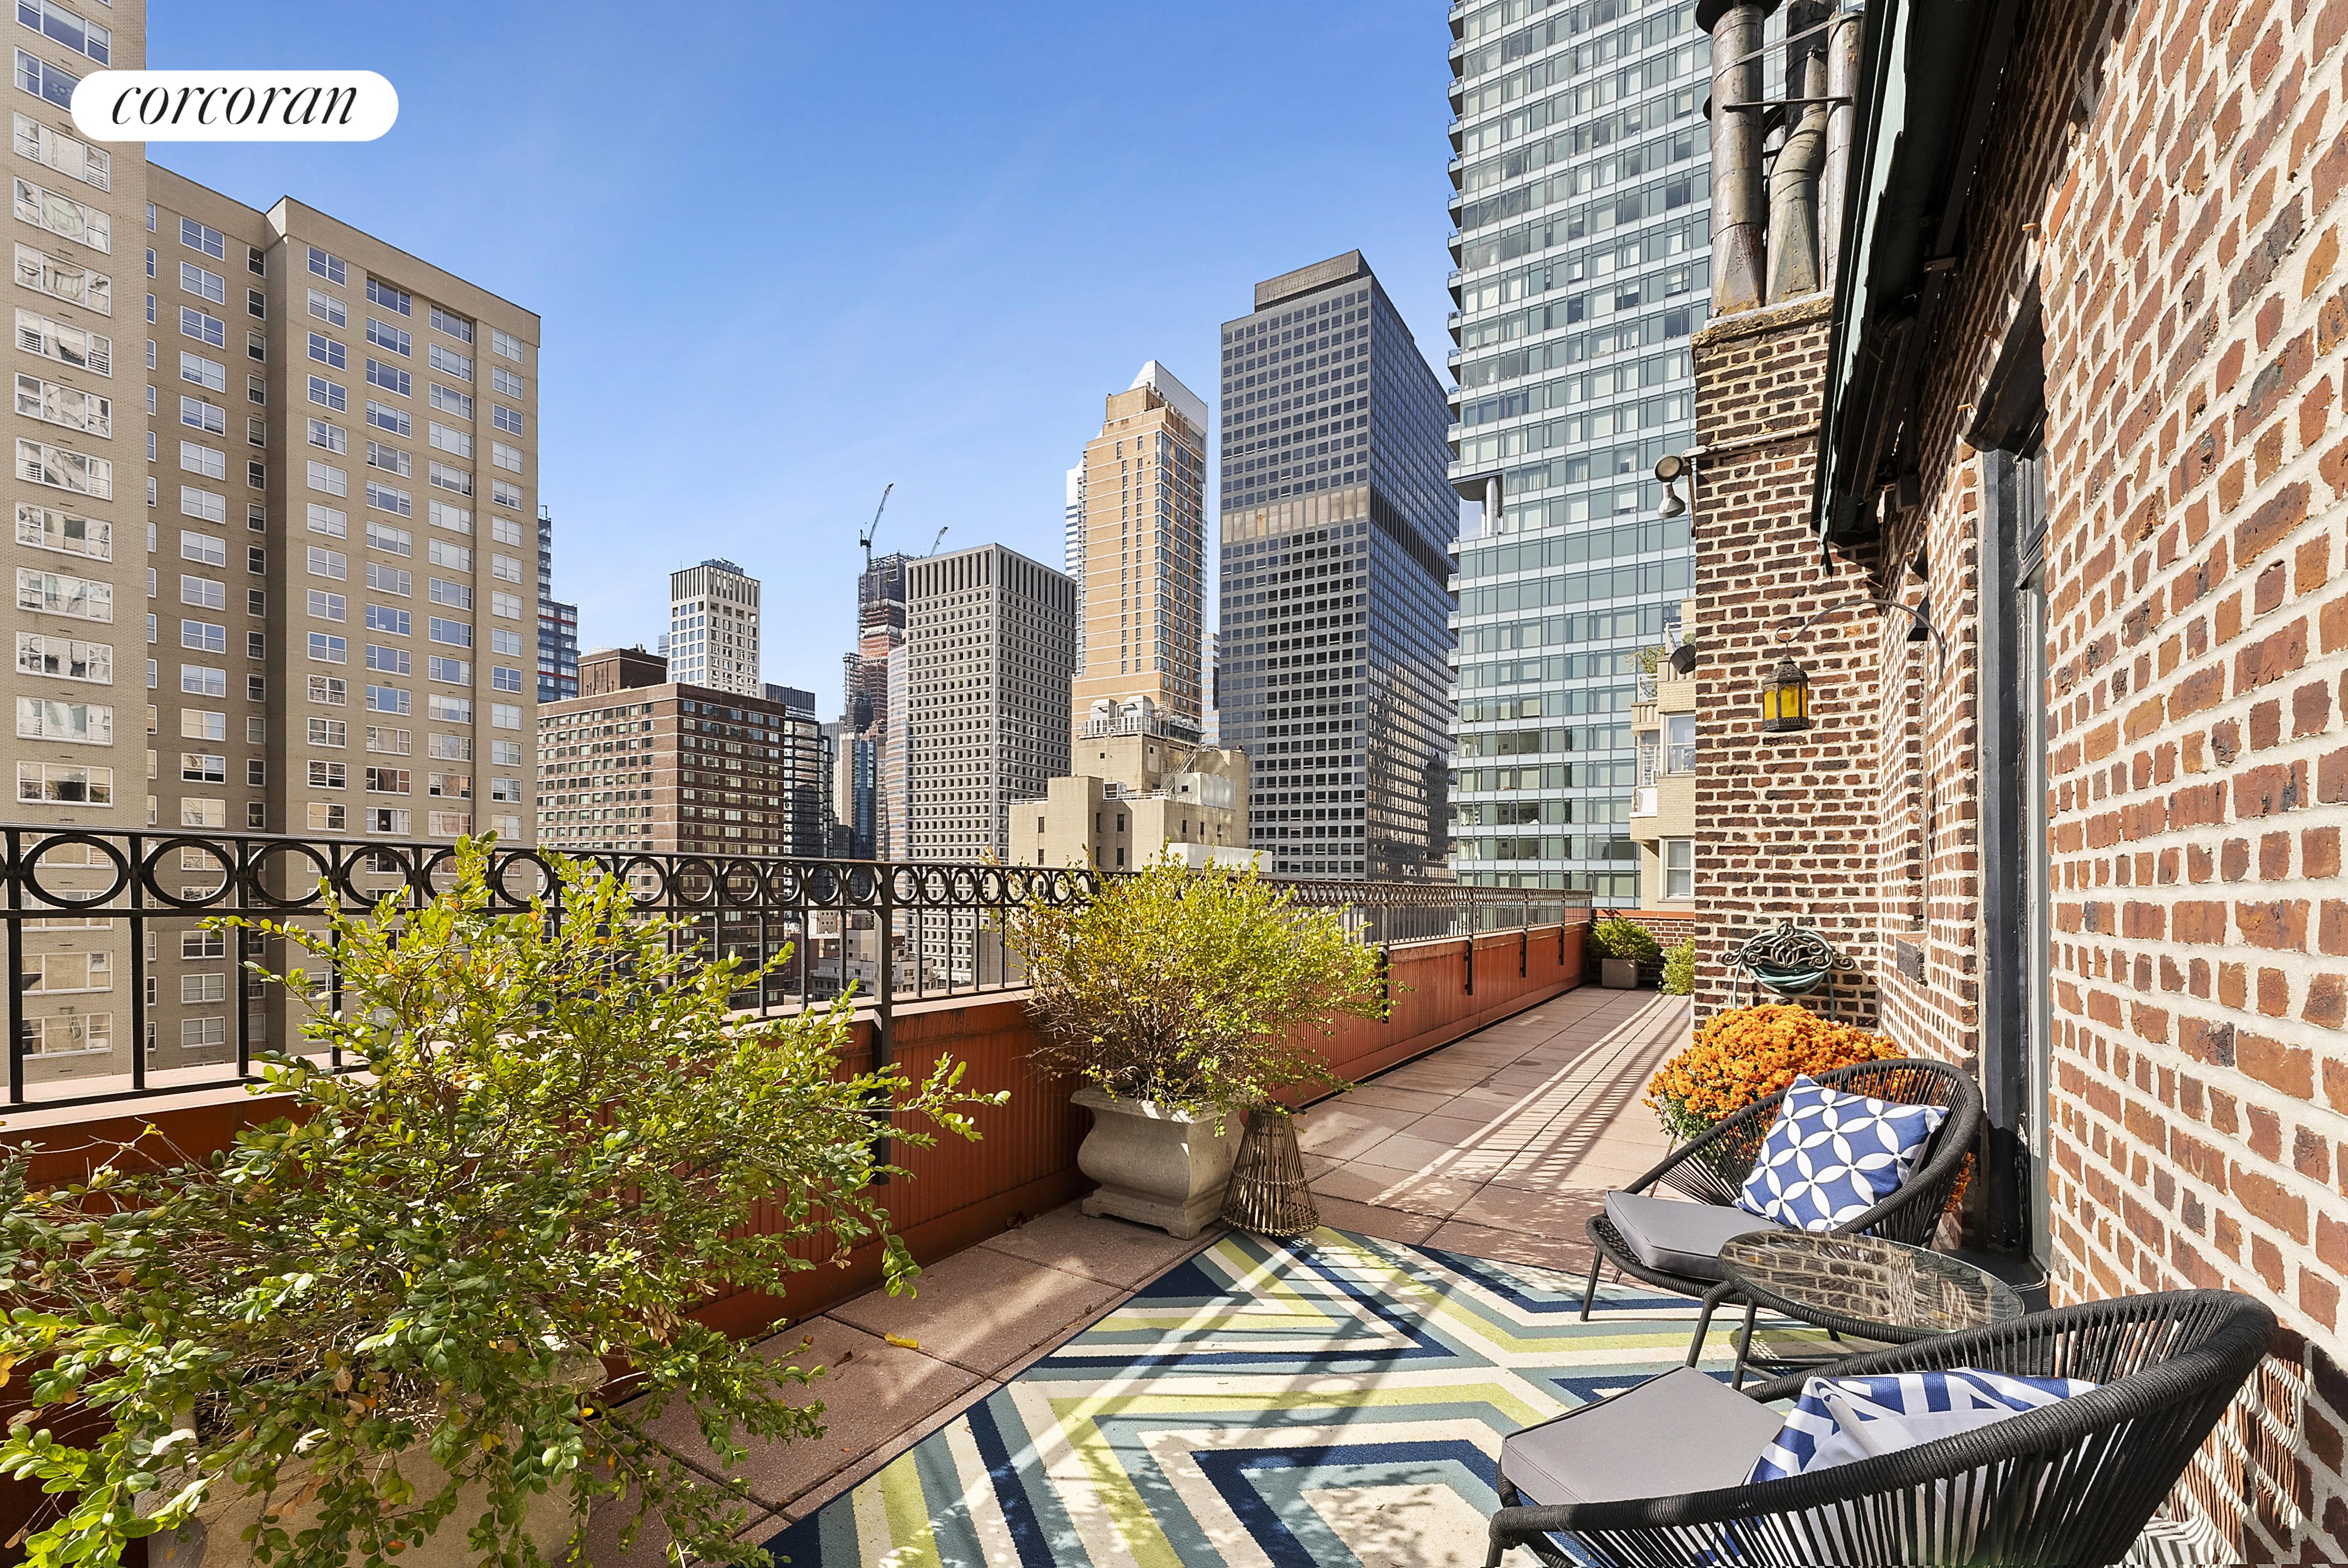 320 East 57th Street Phe, Sutton, Midtown East, NYC - 2 Bedrooms  
2 Bathrooms  
5 Rooms - 